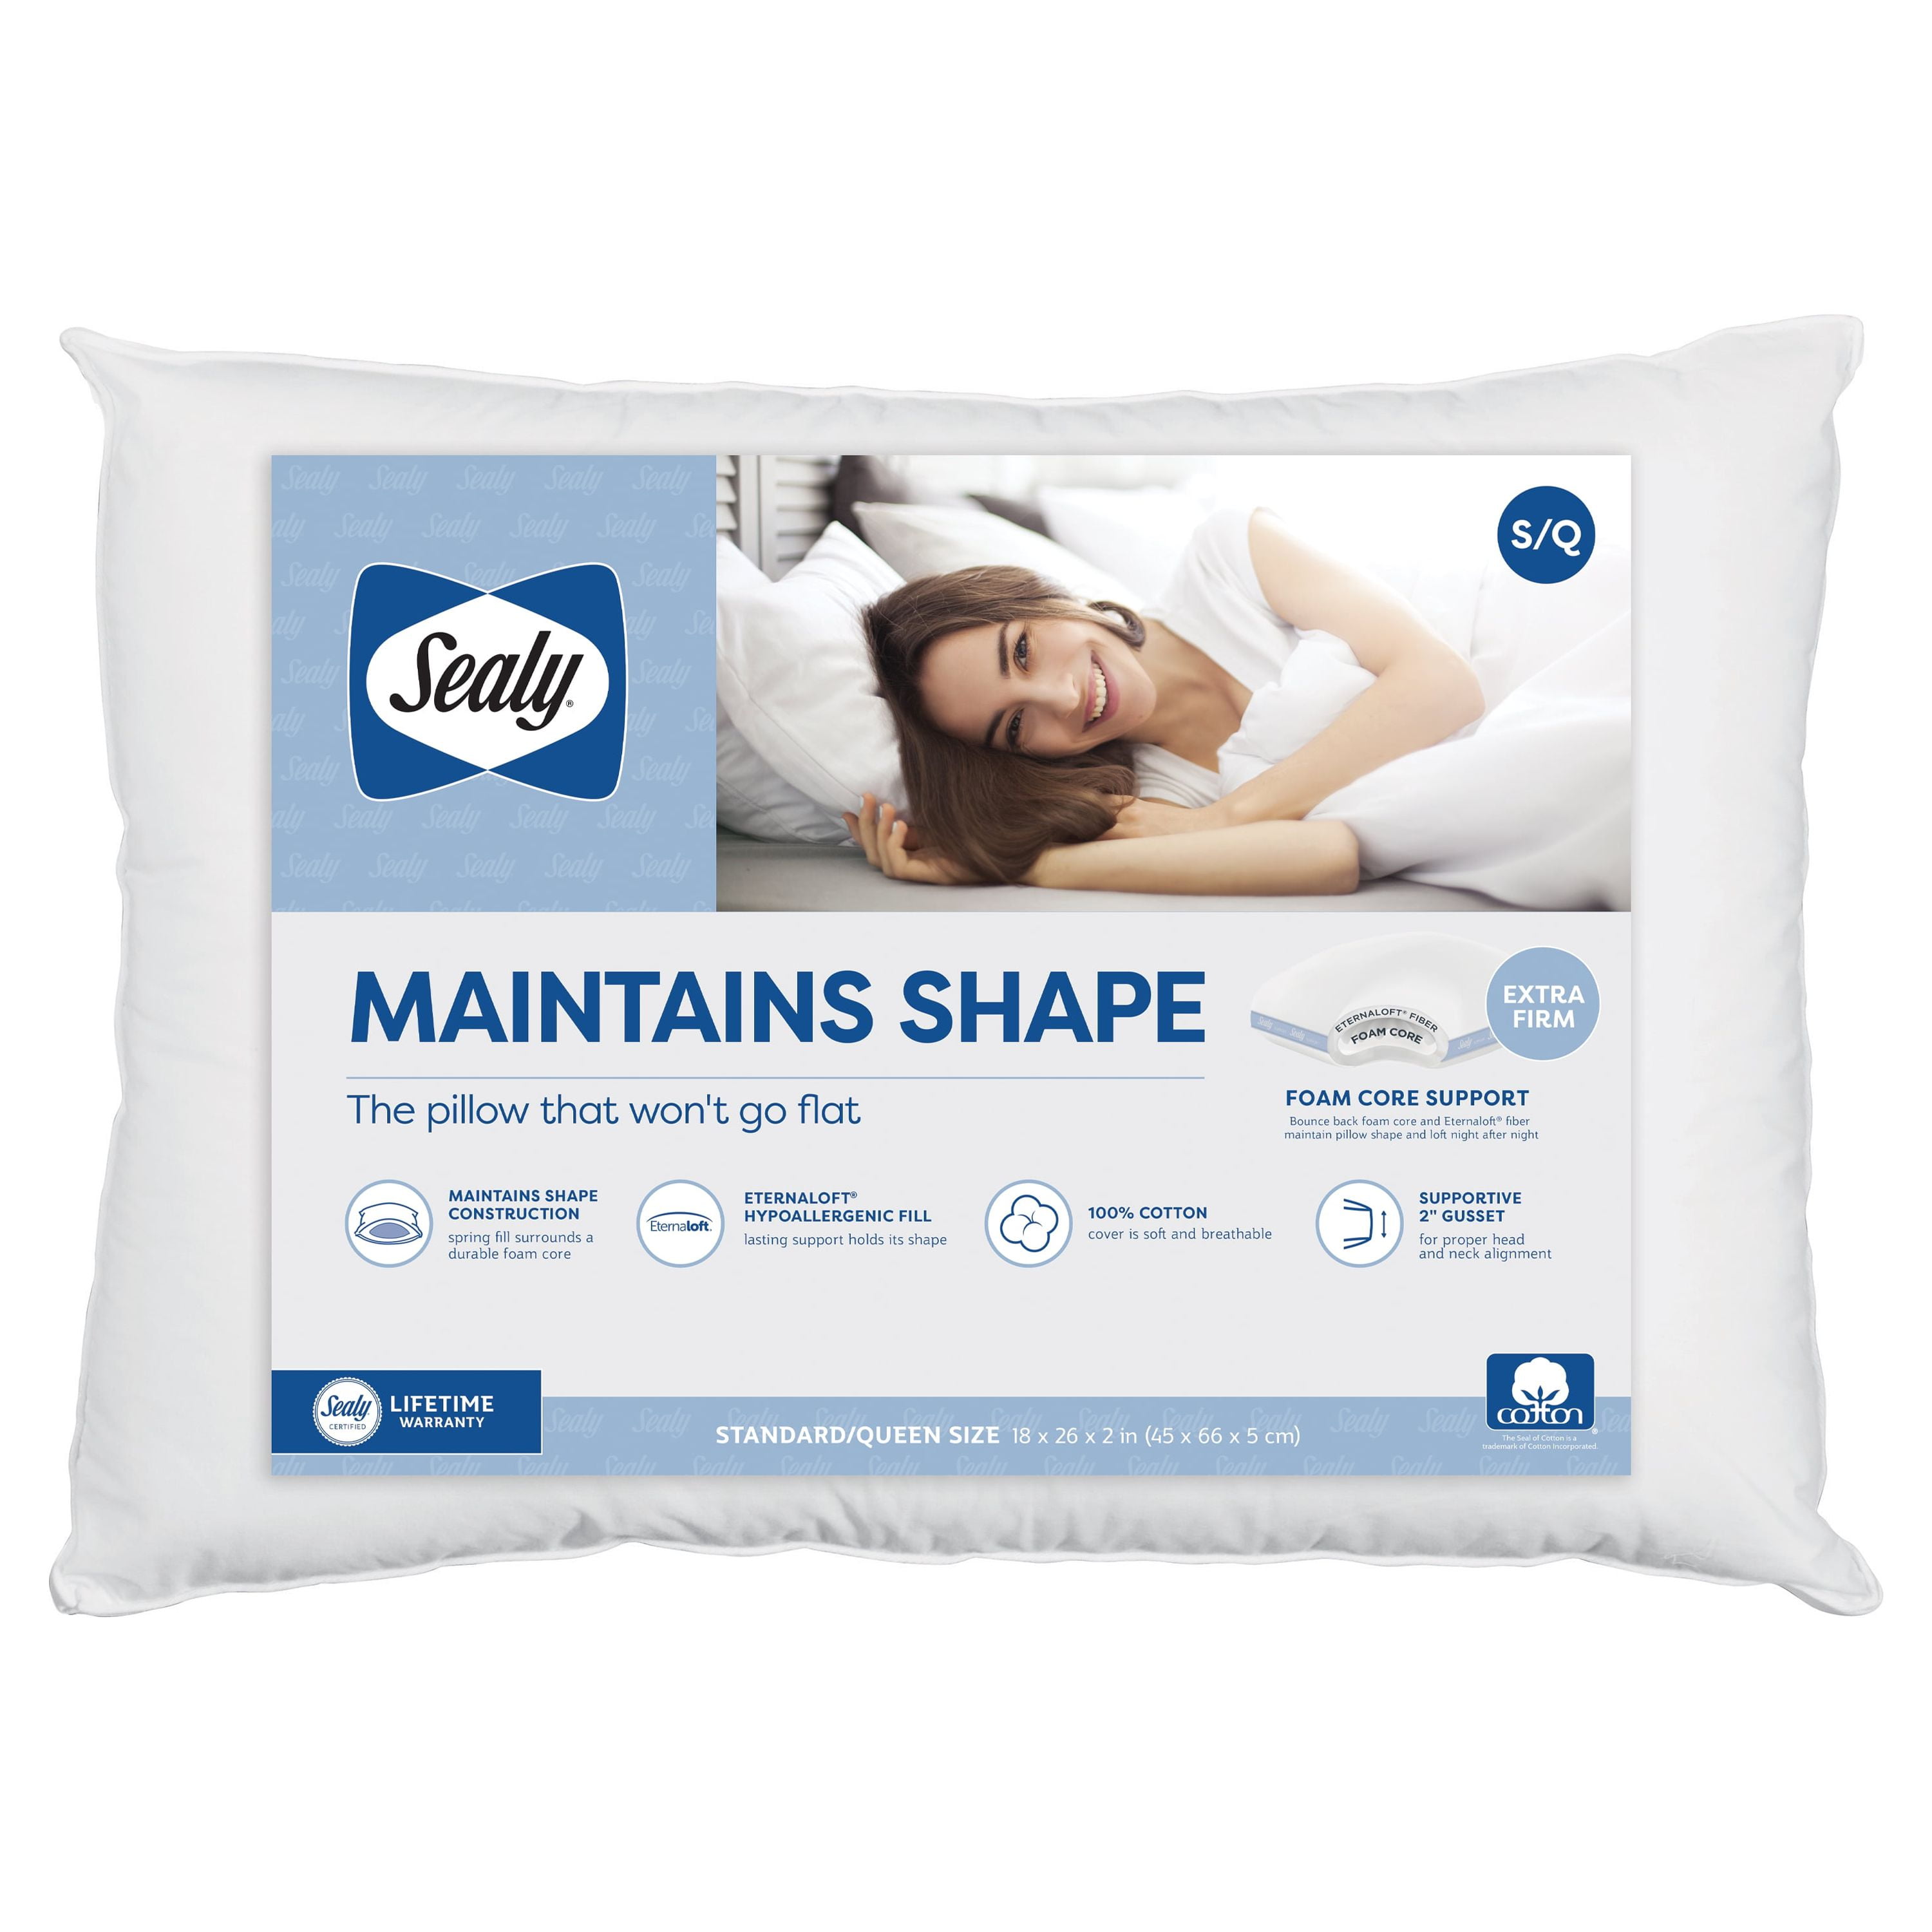 Sealy  Firm Support Pillow